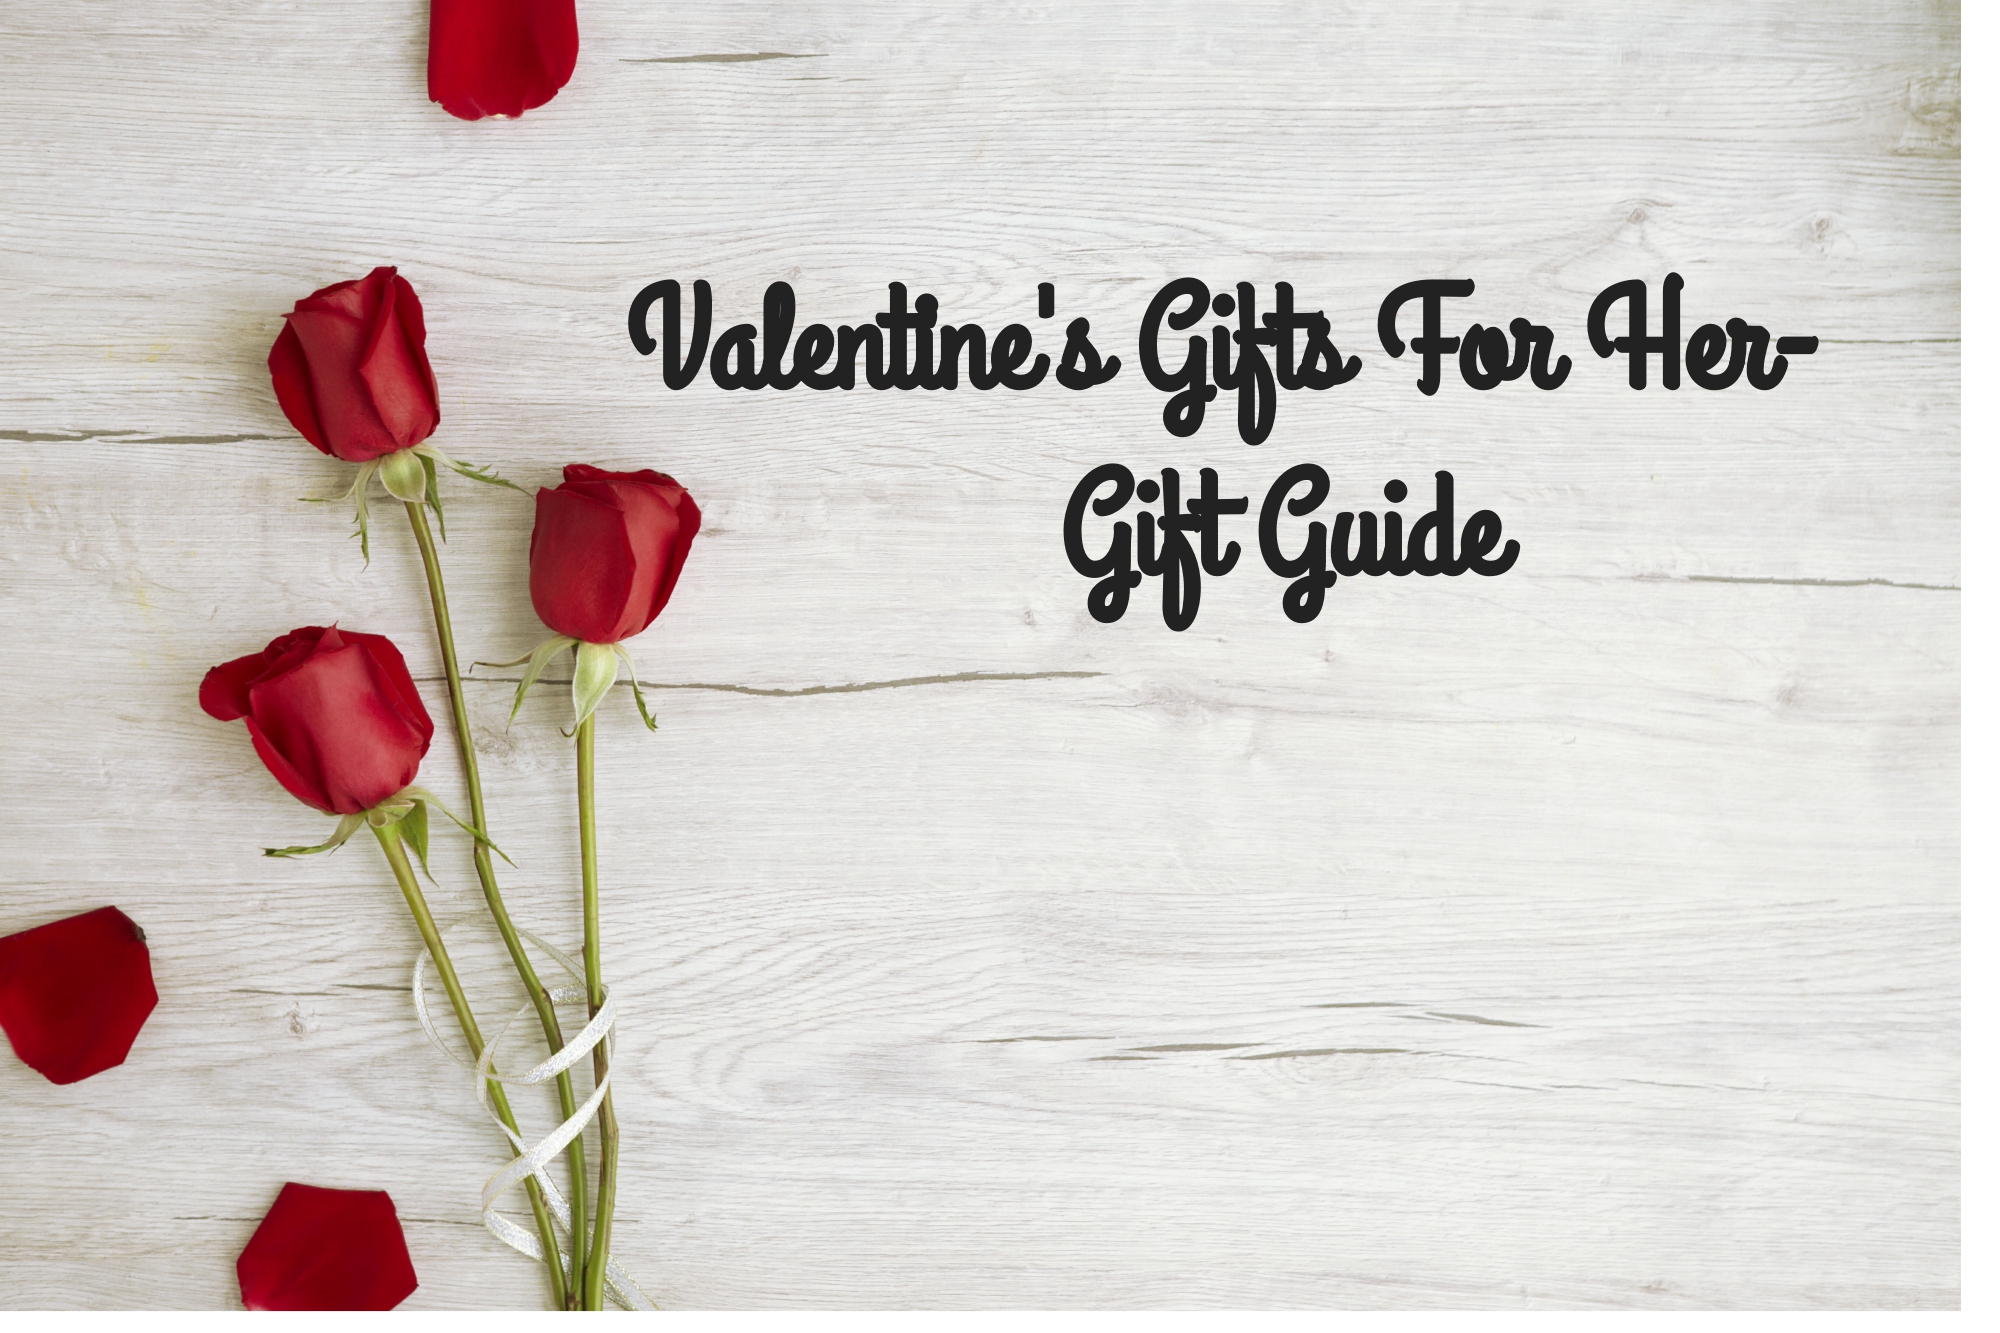 Valentine gift ideas for the person who has everything - Good Morning  America